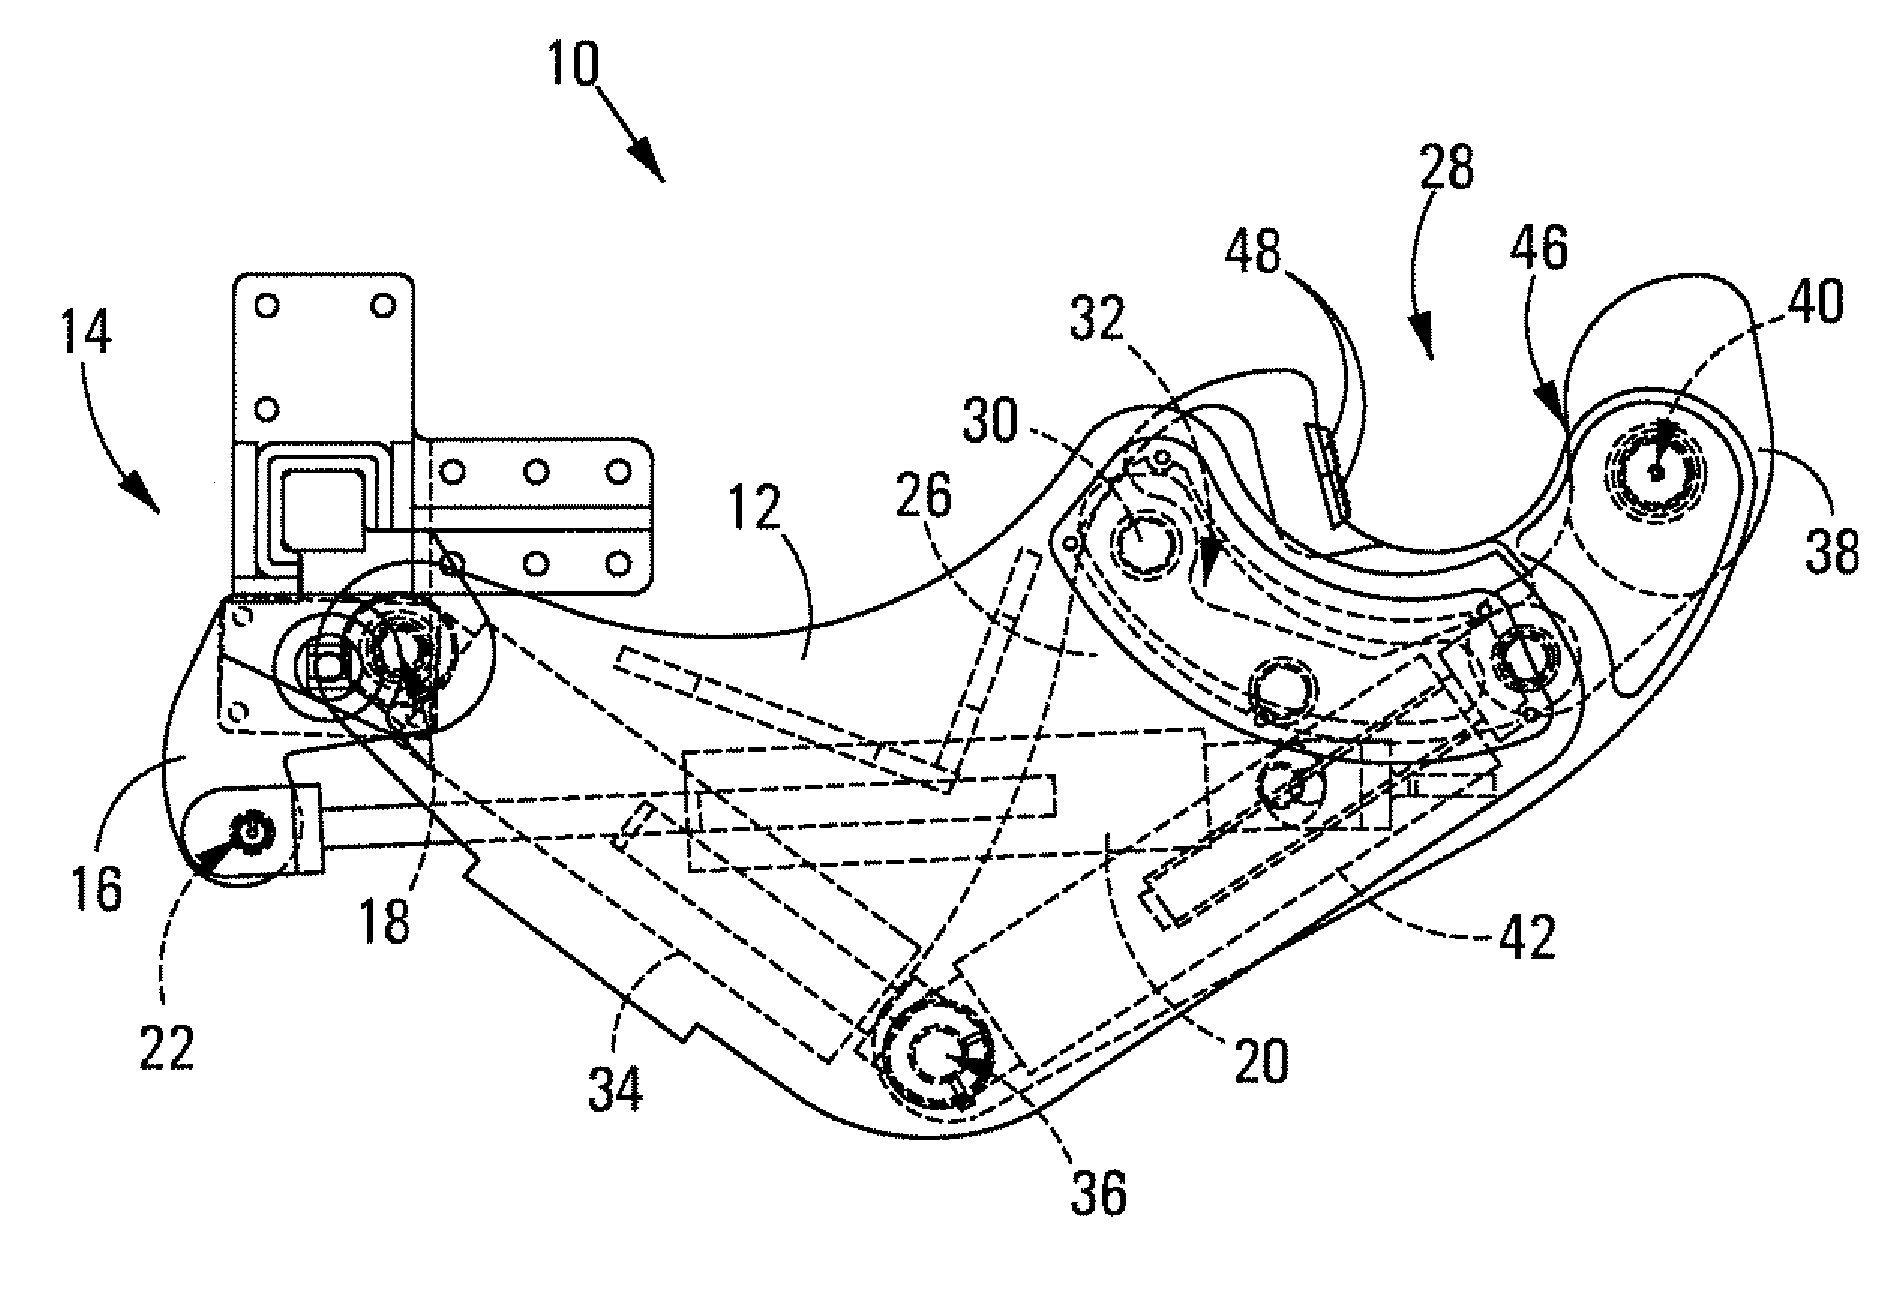 Wrench for use with a drilling apparatus